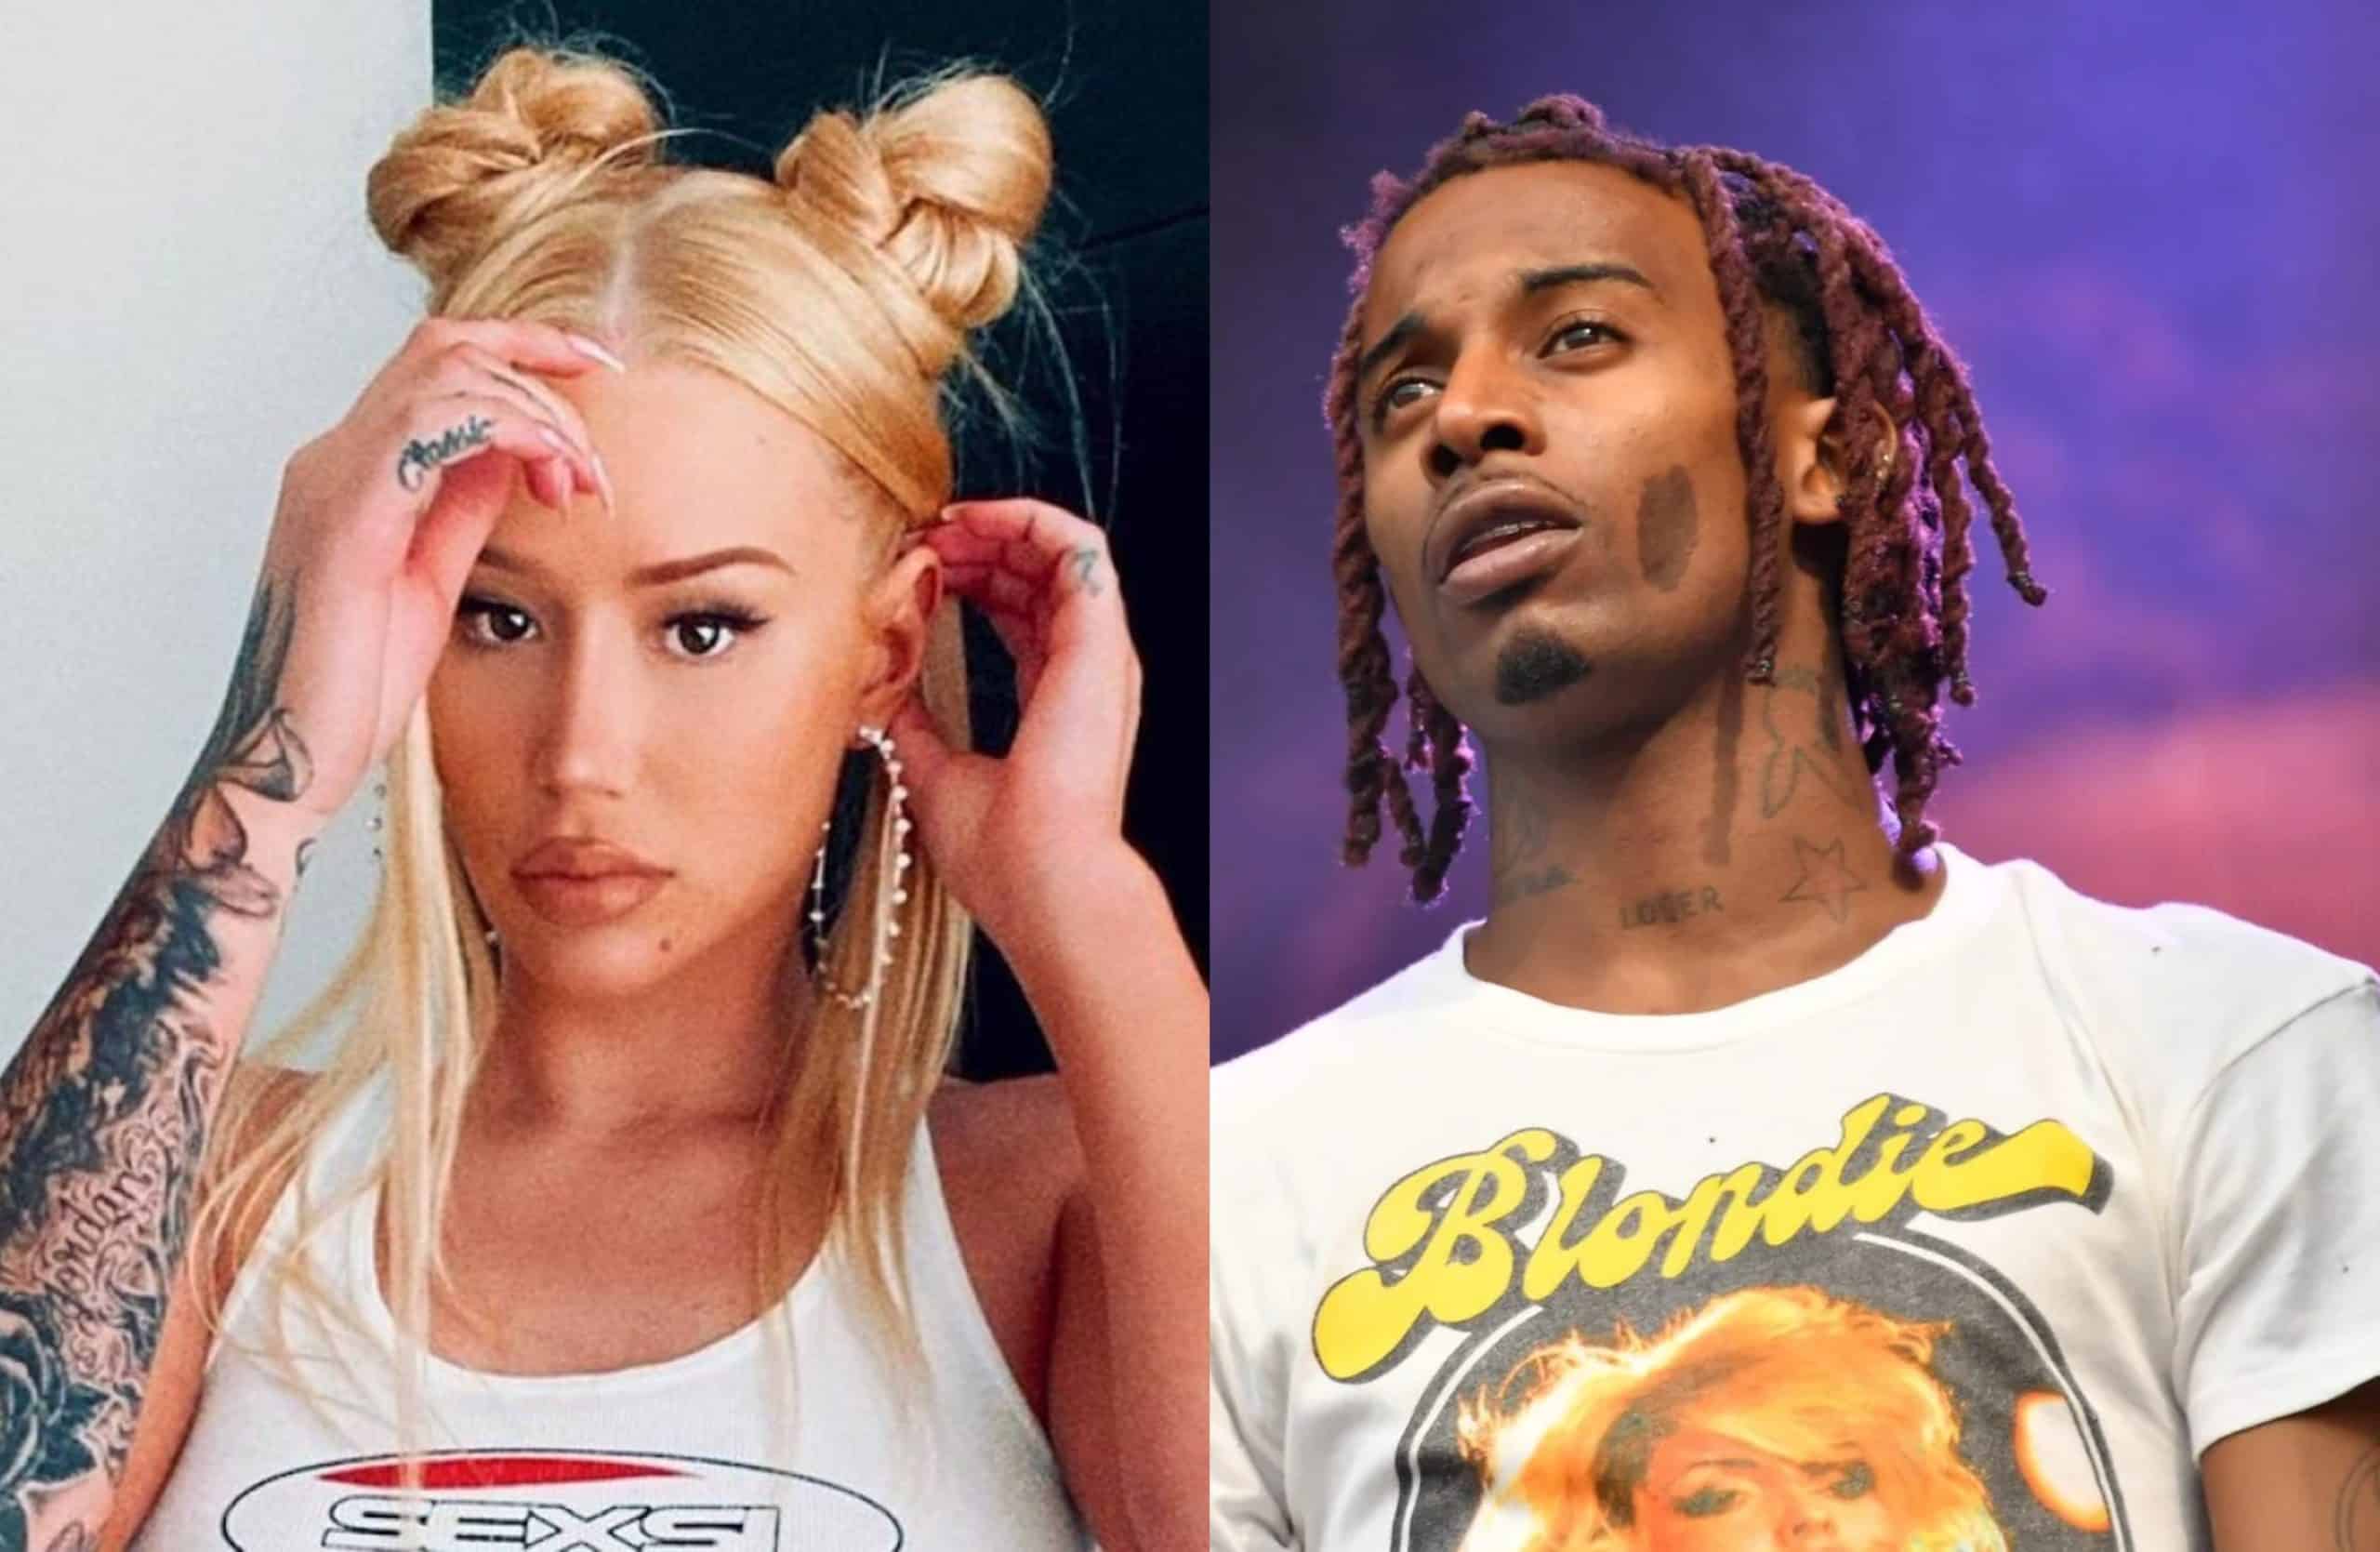 Iggy Azalea claims she has severed all ties with Playboi Carti because he talks to her badly